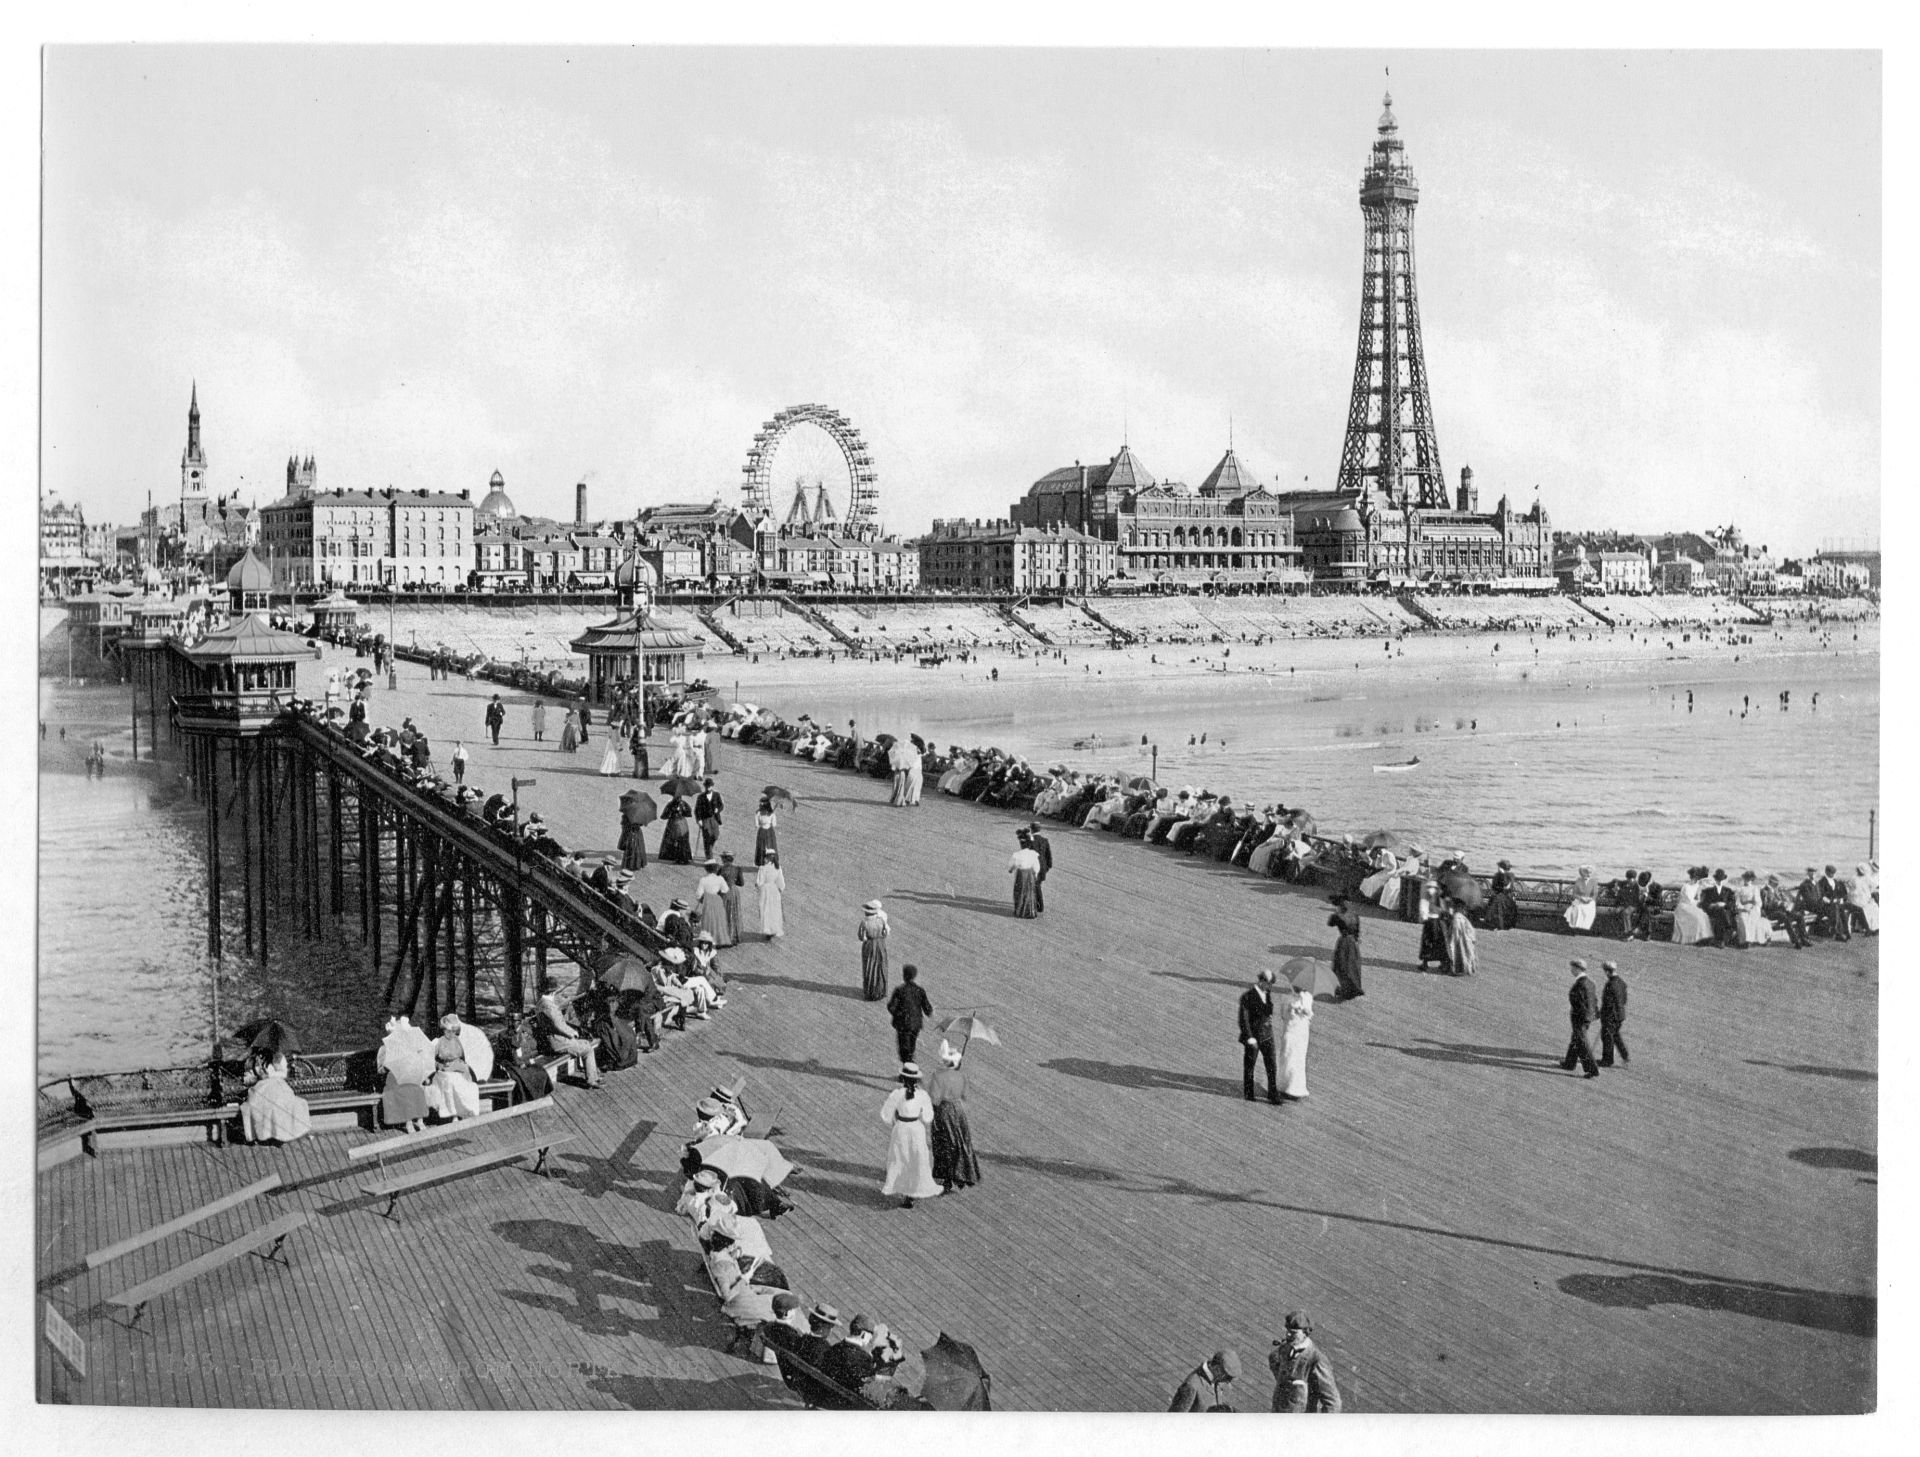 From North Pier, Blackpool, England